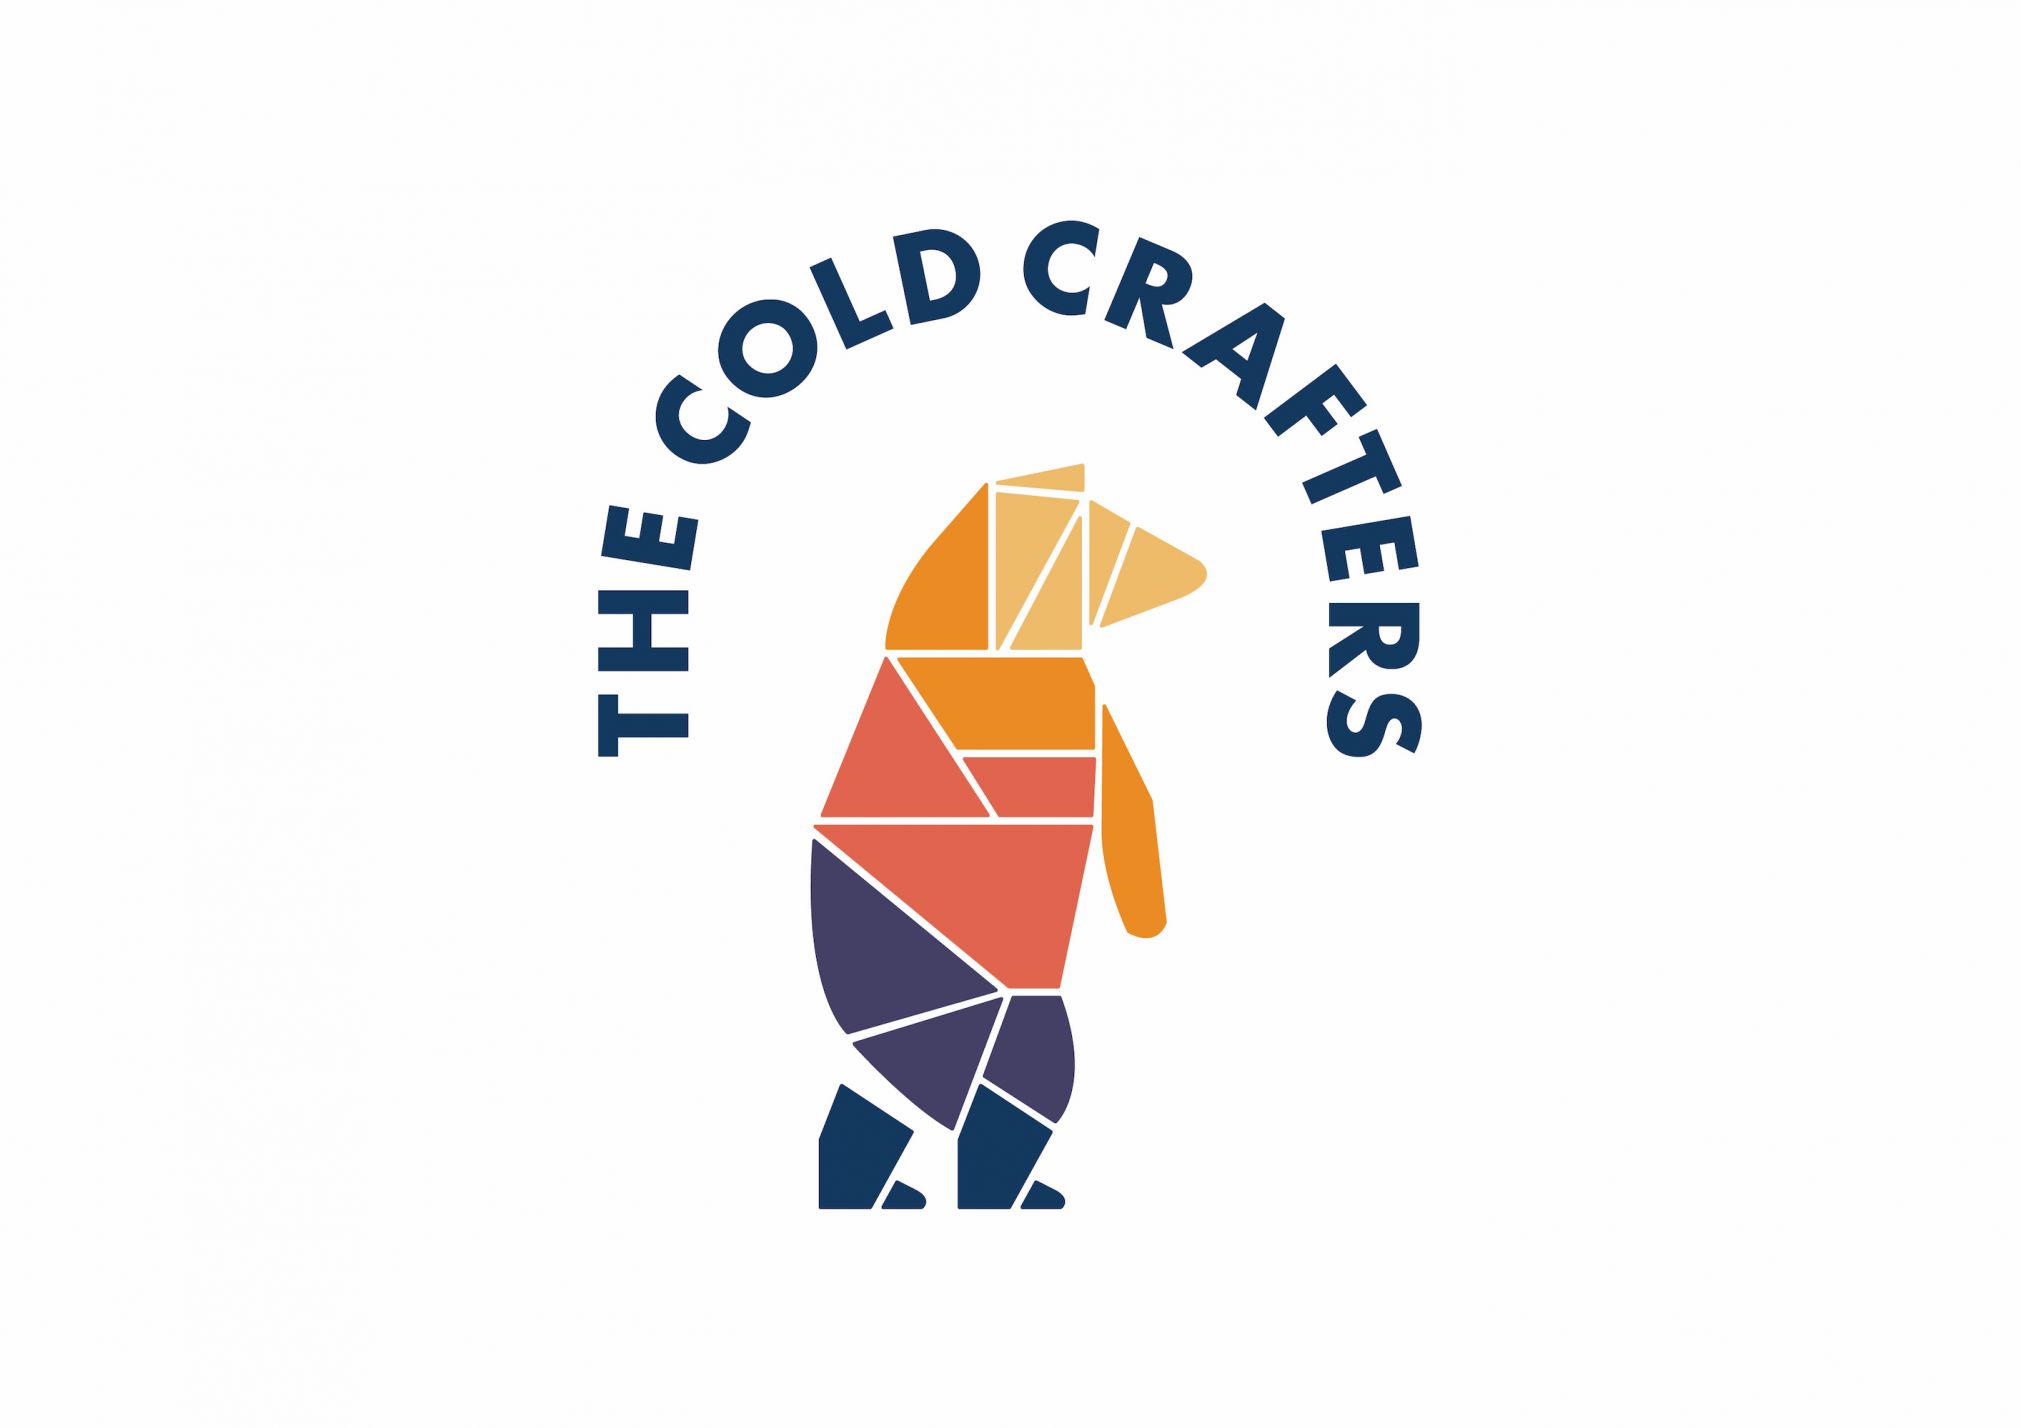 thecoldcrafters Logo